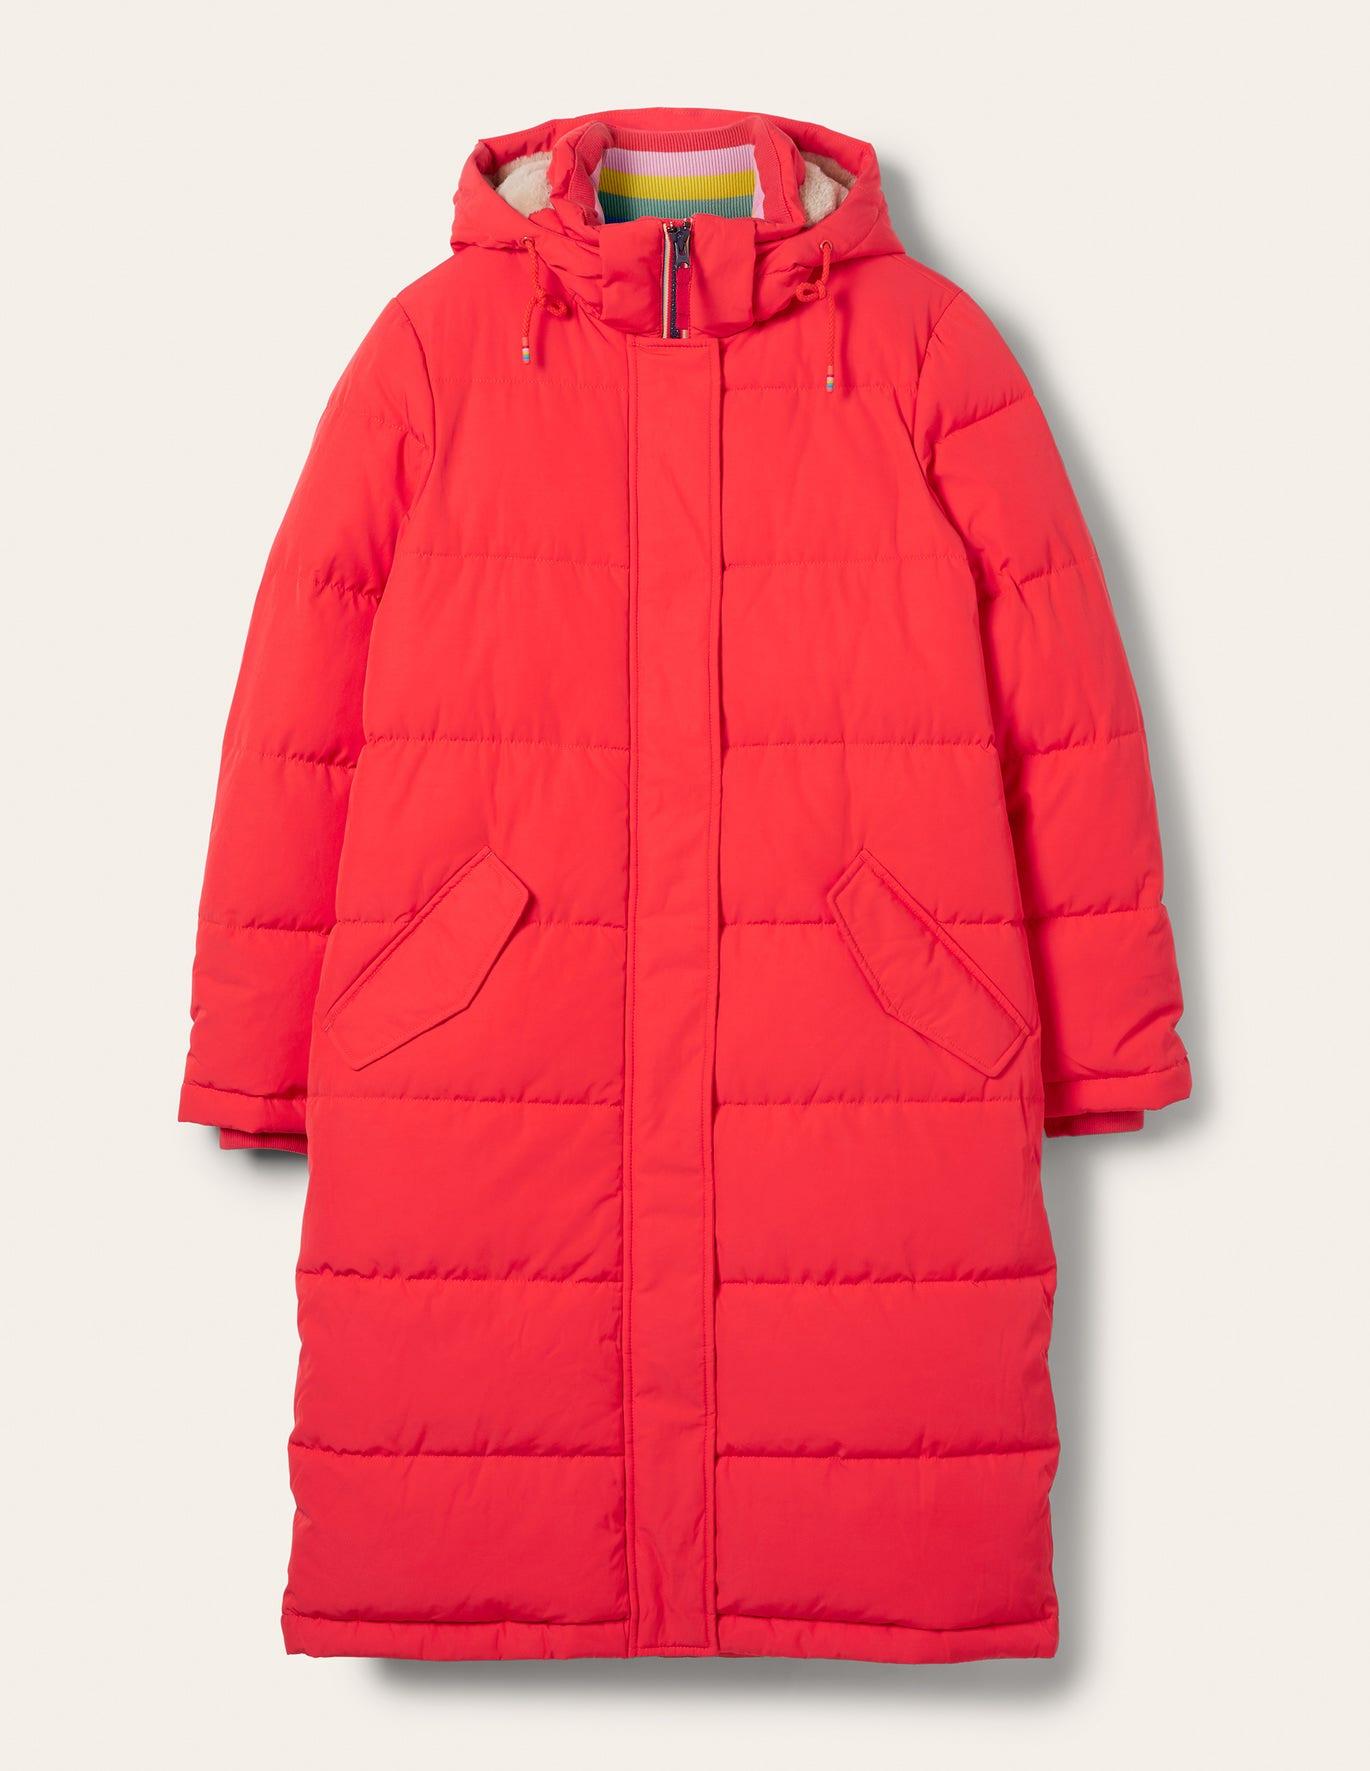 Boden Skye Puffer Coat Bright Coral in Red | Lyst